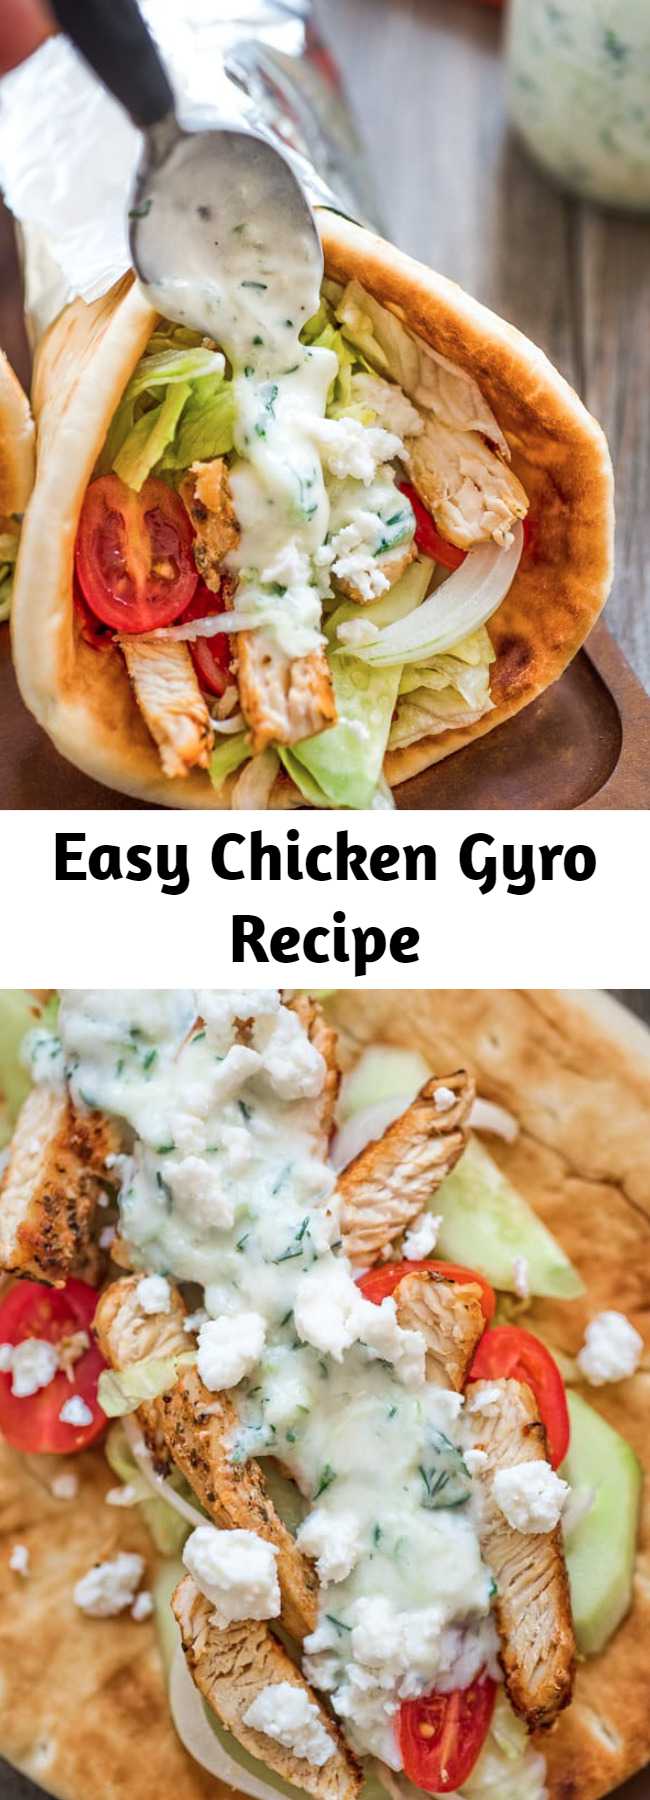 Easy Chicken Gyro Recipe - An easy to make sandwich, great for both lunch and dinner. Served with fresh vegetables and tzatziki sauce. If you haven’t tried a homemade Chicken Gyro yet, you are missing out! Fresh vegetables, tender chicken, tzatziki sauce, and feta cheese make an unforgettable combination! You’ll love it from the first bite. #chicken #lunch #sandwich #greek #healthyrecipe #dinner